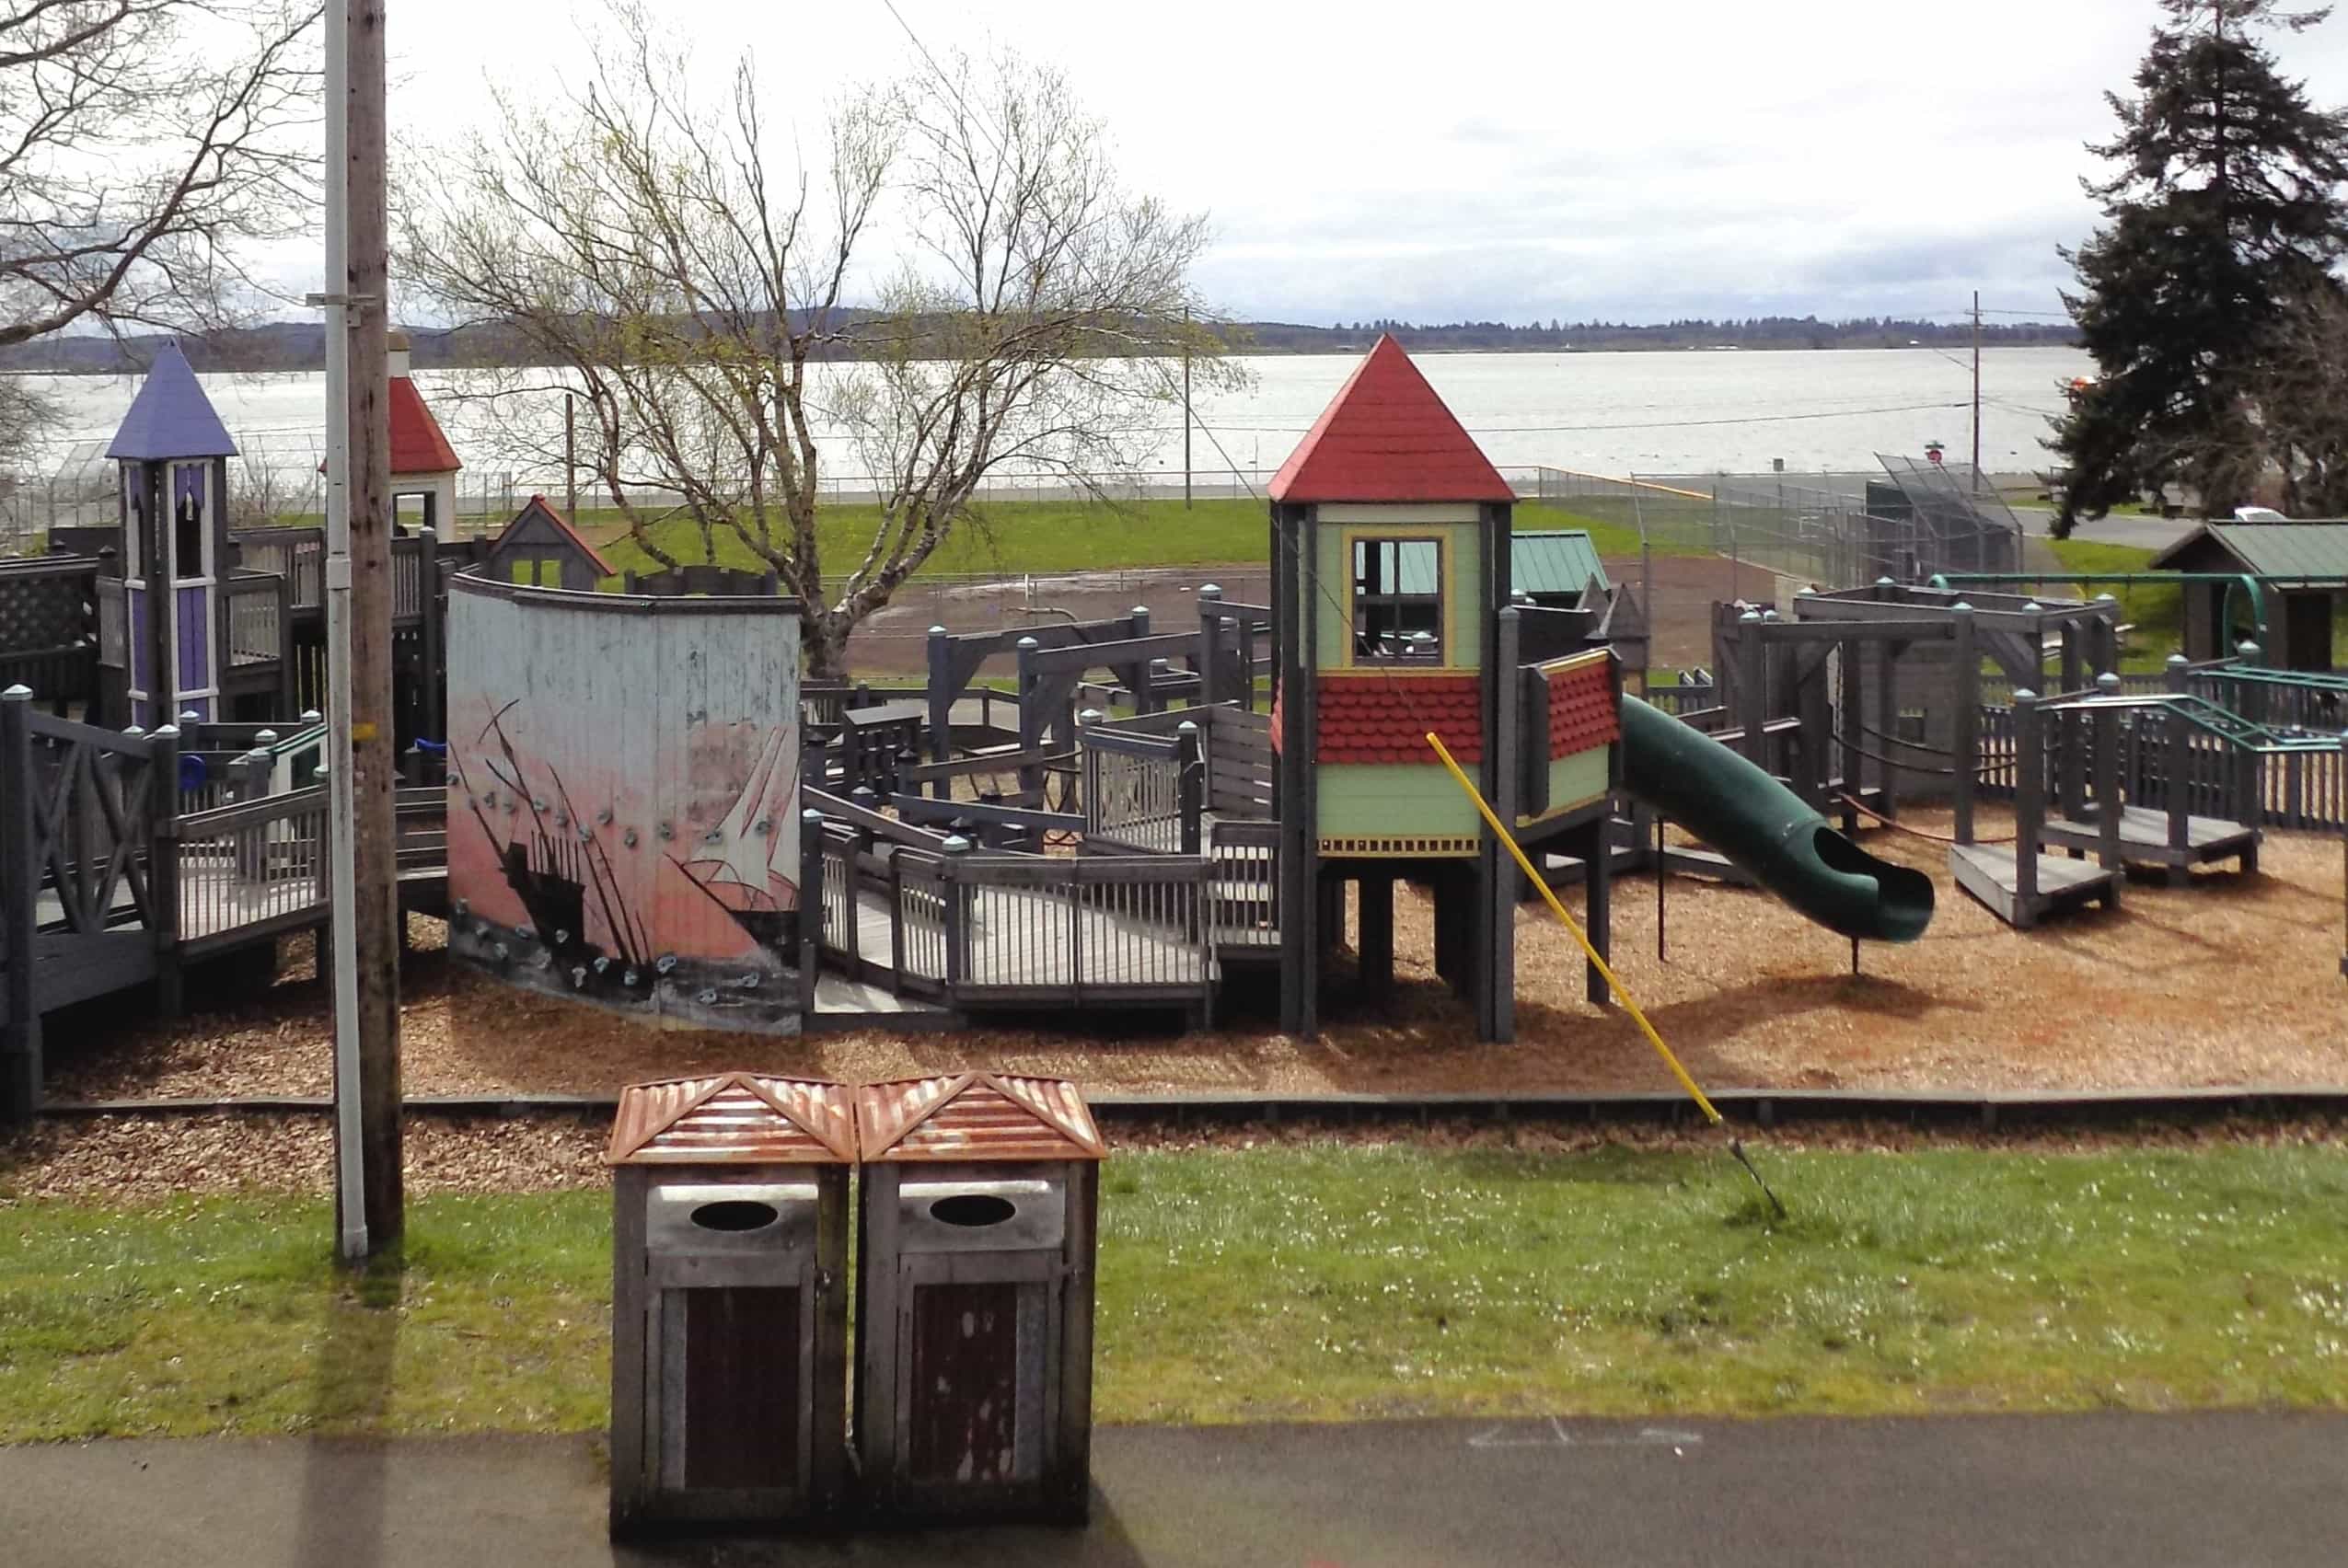 In What Year Was The Construction Of The New Play Area At Tapiola Park In Astoria, Oregon Completed?